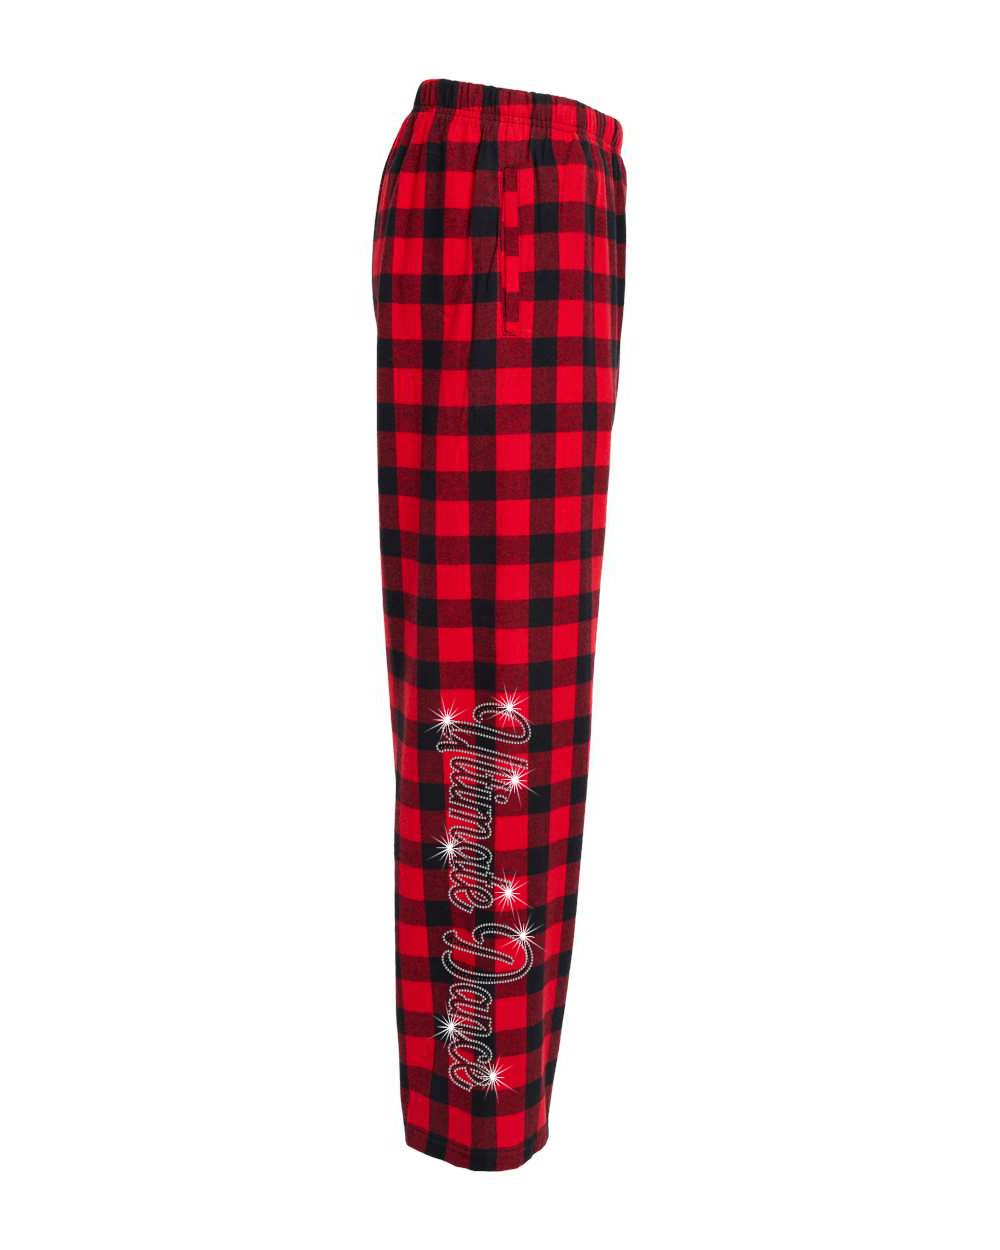 Ultimate Dance On The Move Buffalo Plaid Pants Ladies and Youth Sizes